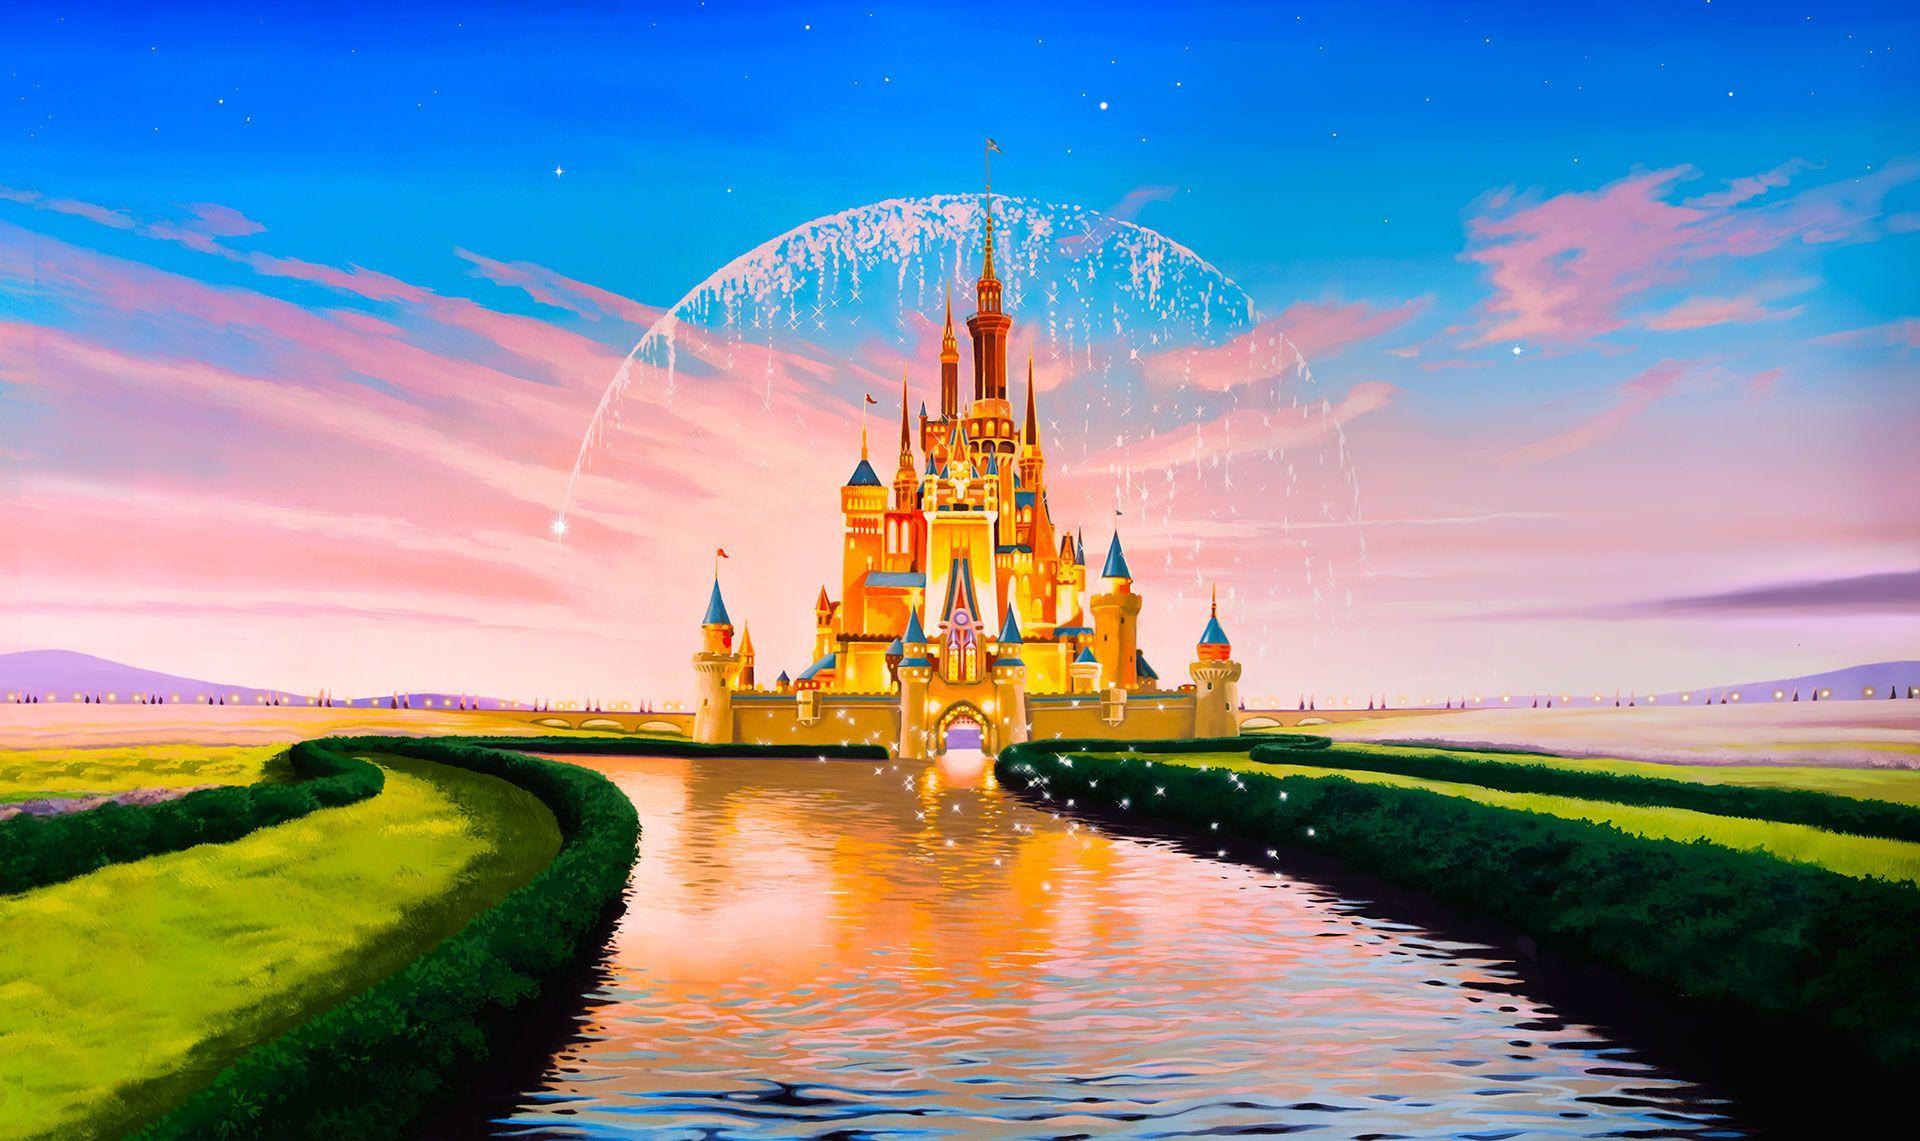 Twilight Castle in the style of Disney new wallpaper available #disney # wallpaper #murals. Disney desktop wallpaper, Disney background, Disney wallpaper